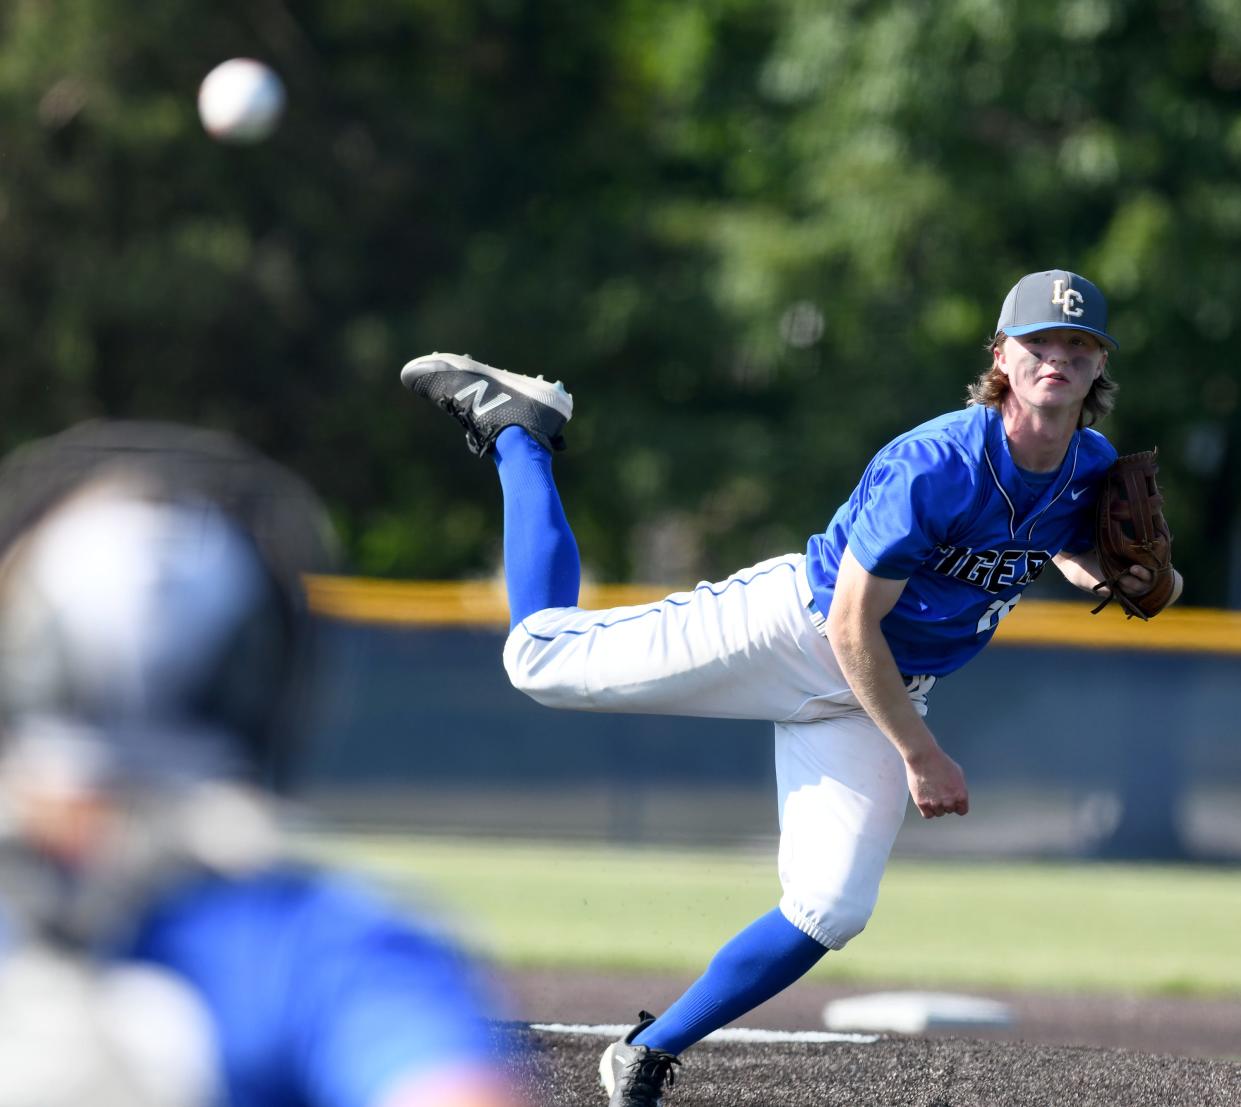 Lake Center Christian's Dylan Maninga delivers a pitch against Tiffin Calvert during a Division IV baseball regional semifinal game last season.